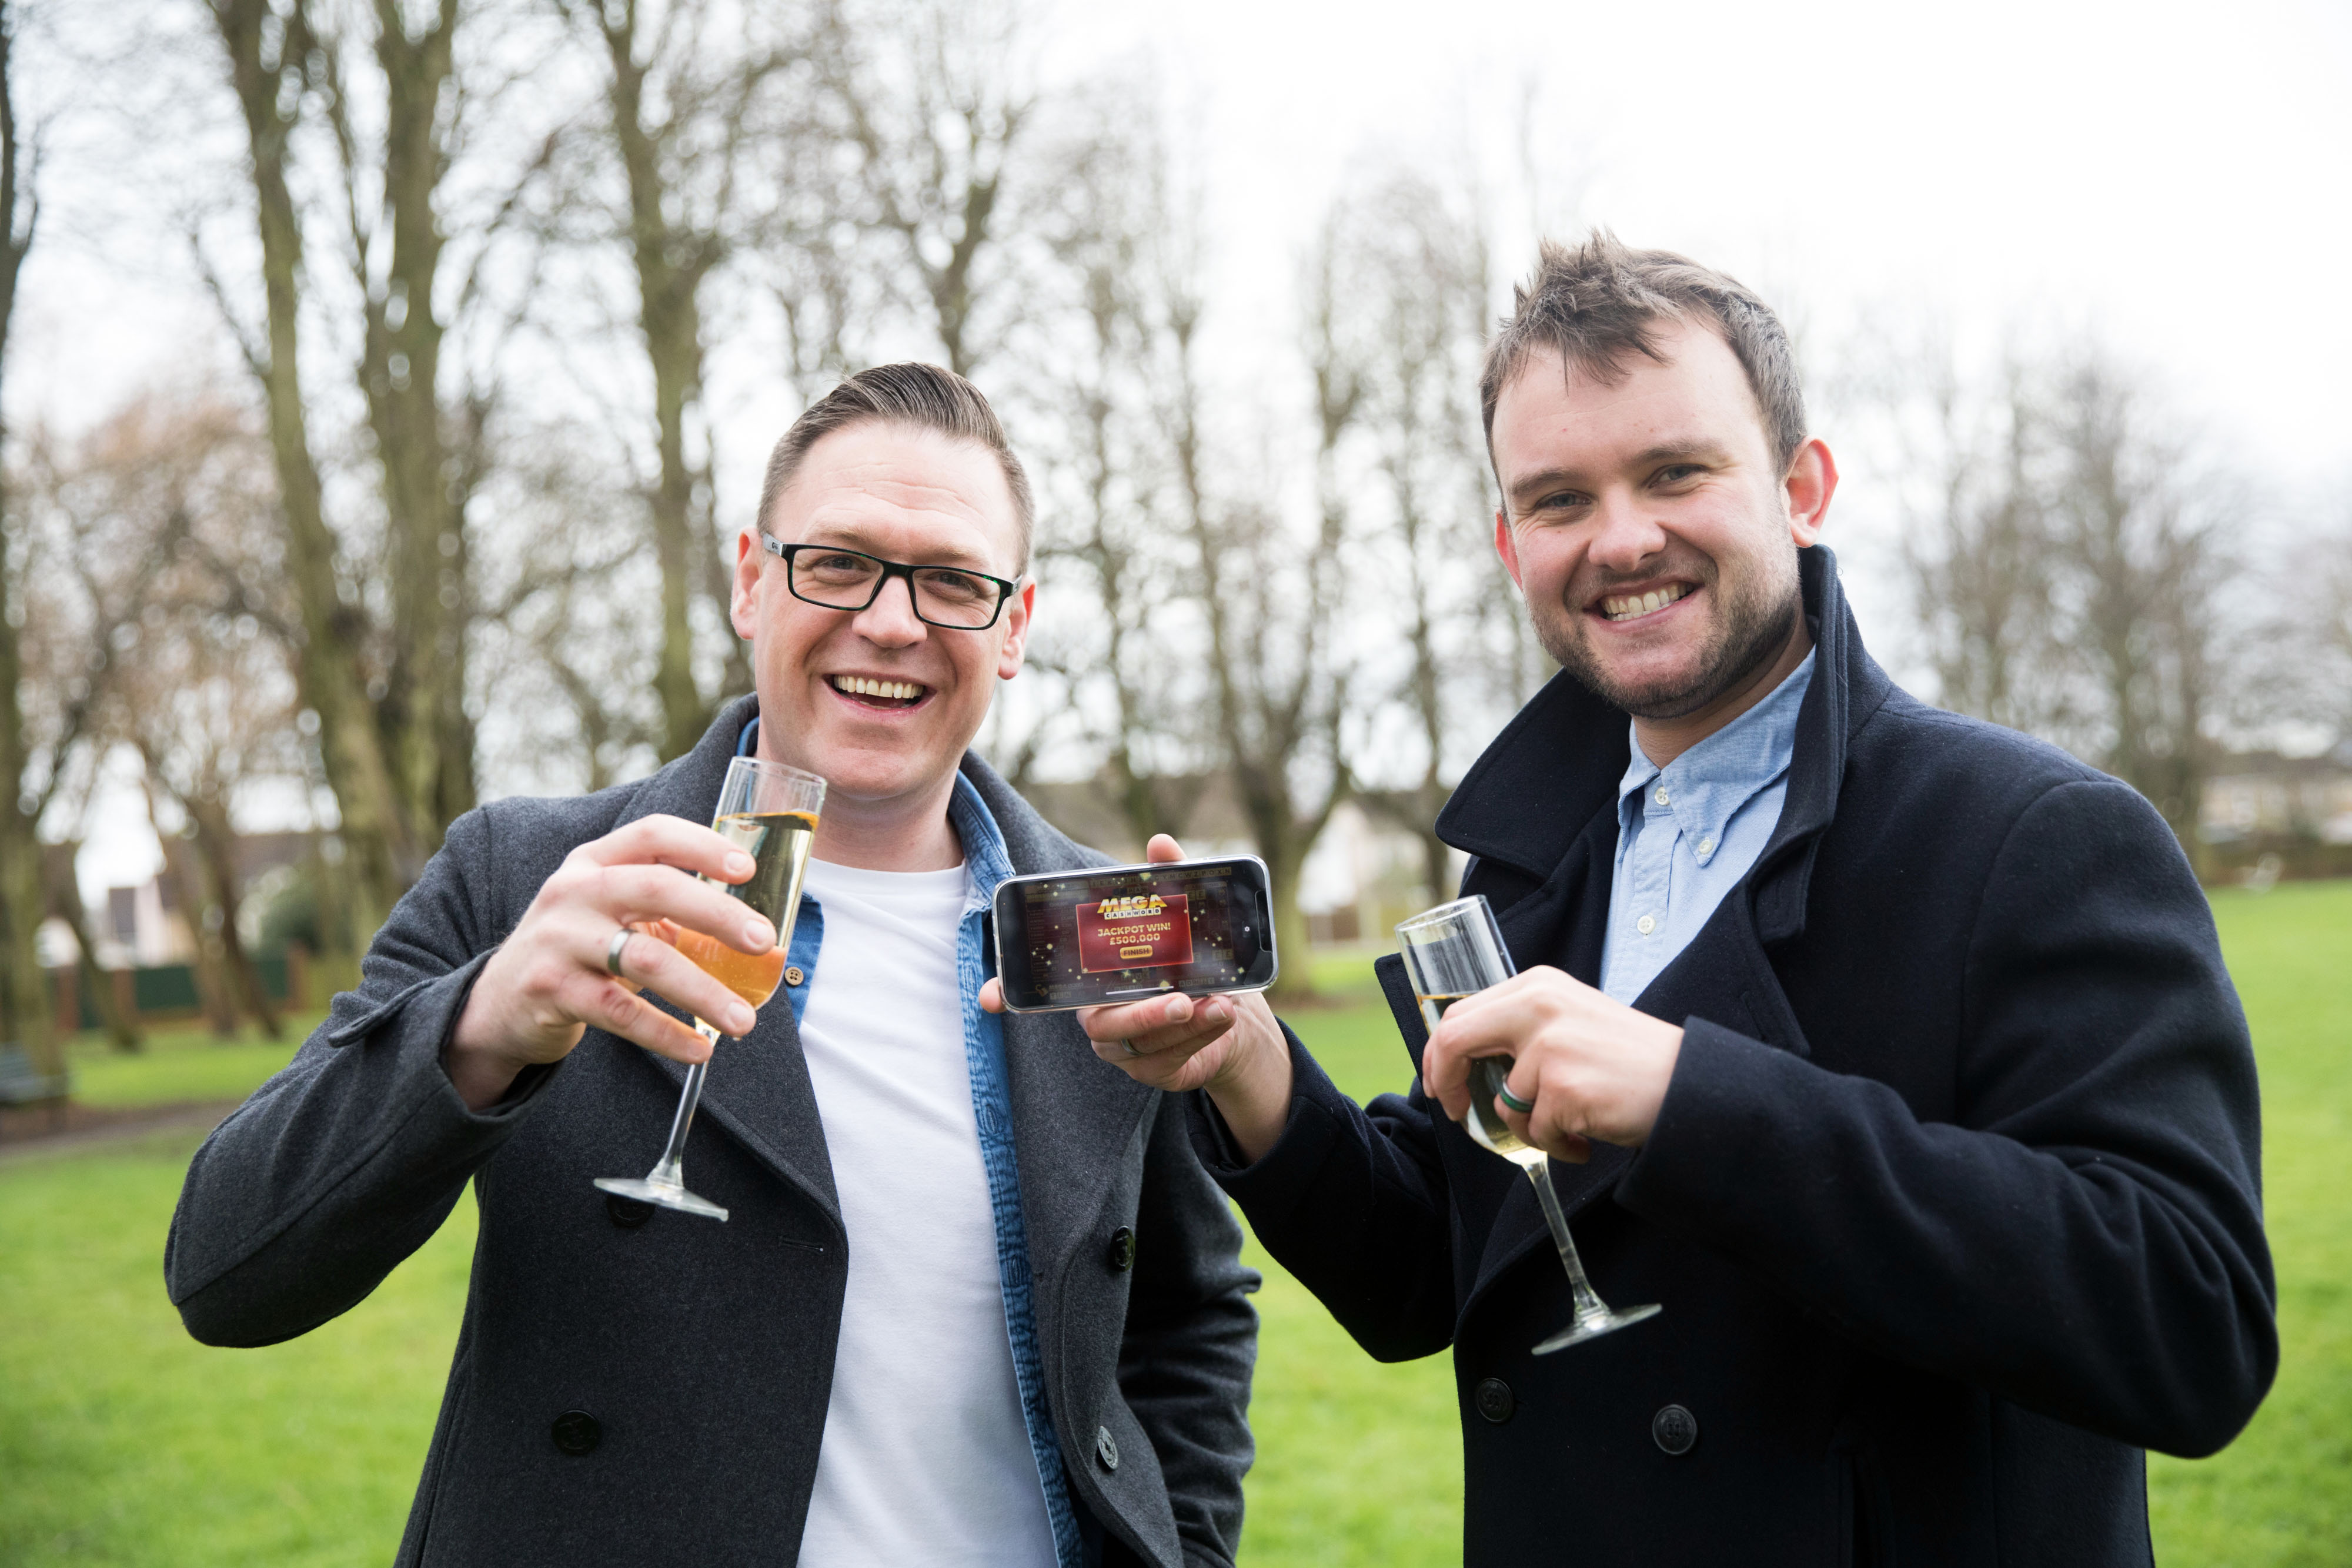 Gareth Bradley (left) won £500,000 on the National Lottery game Mega Cashword, and celebrated with his partner Connor Dennis. (National Lottery/ PA)